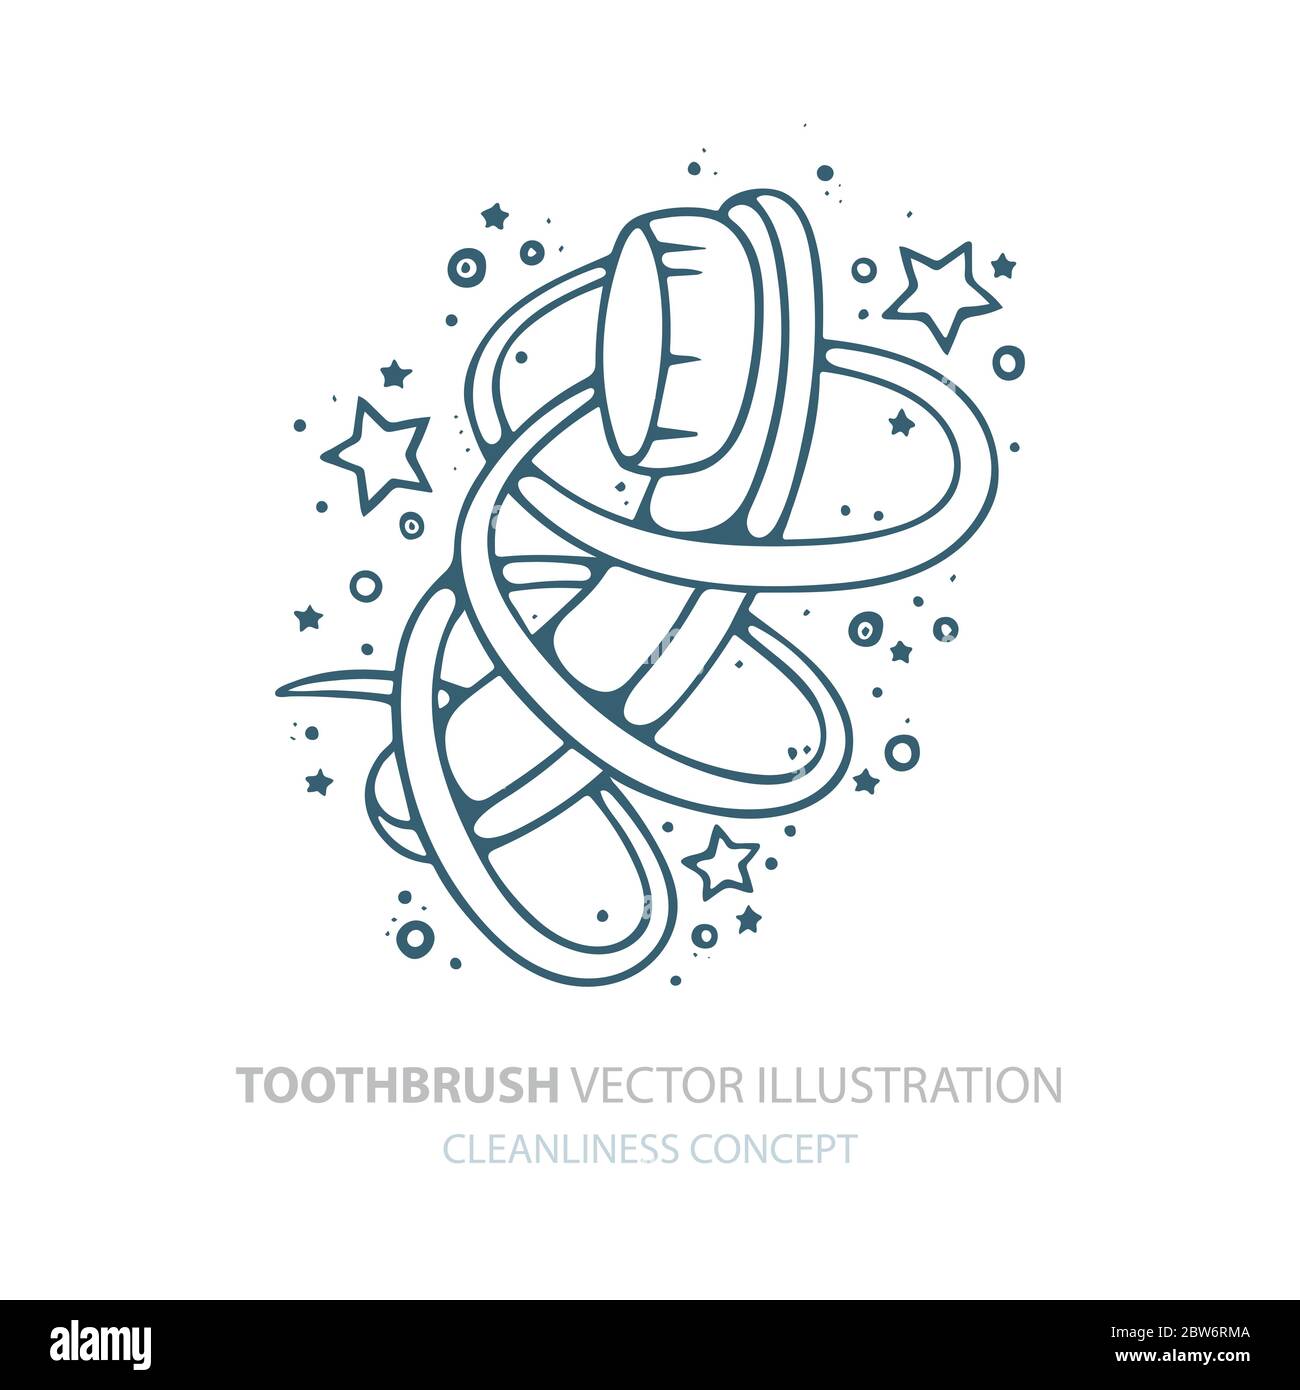 Toothbrush. Toothbrush hand drawn vector illustration. Healthcare stomatology and cleaning vector sketch drawing. Dental care concept. Dentistry symbo Stock Vector